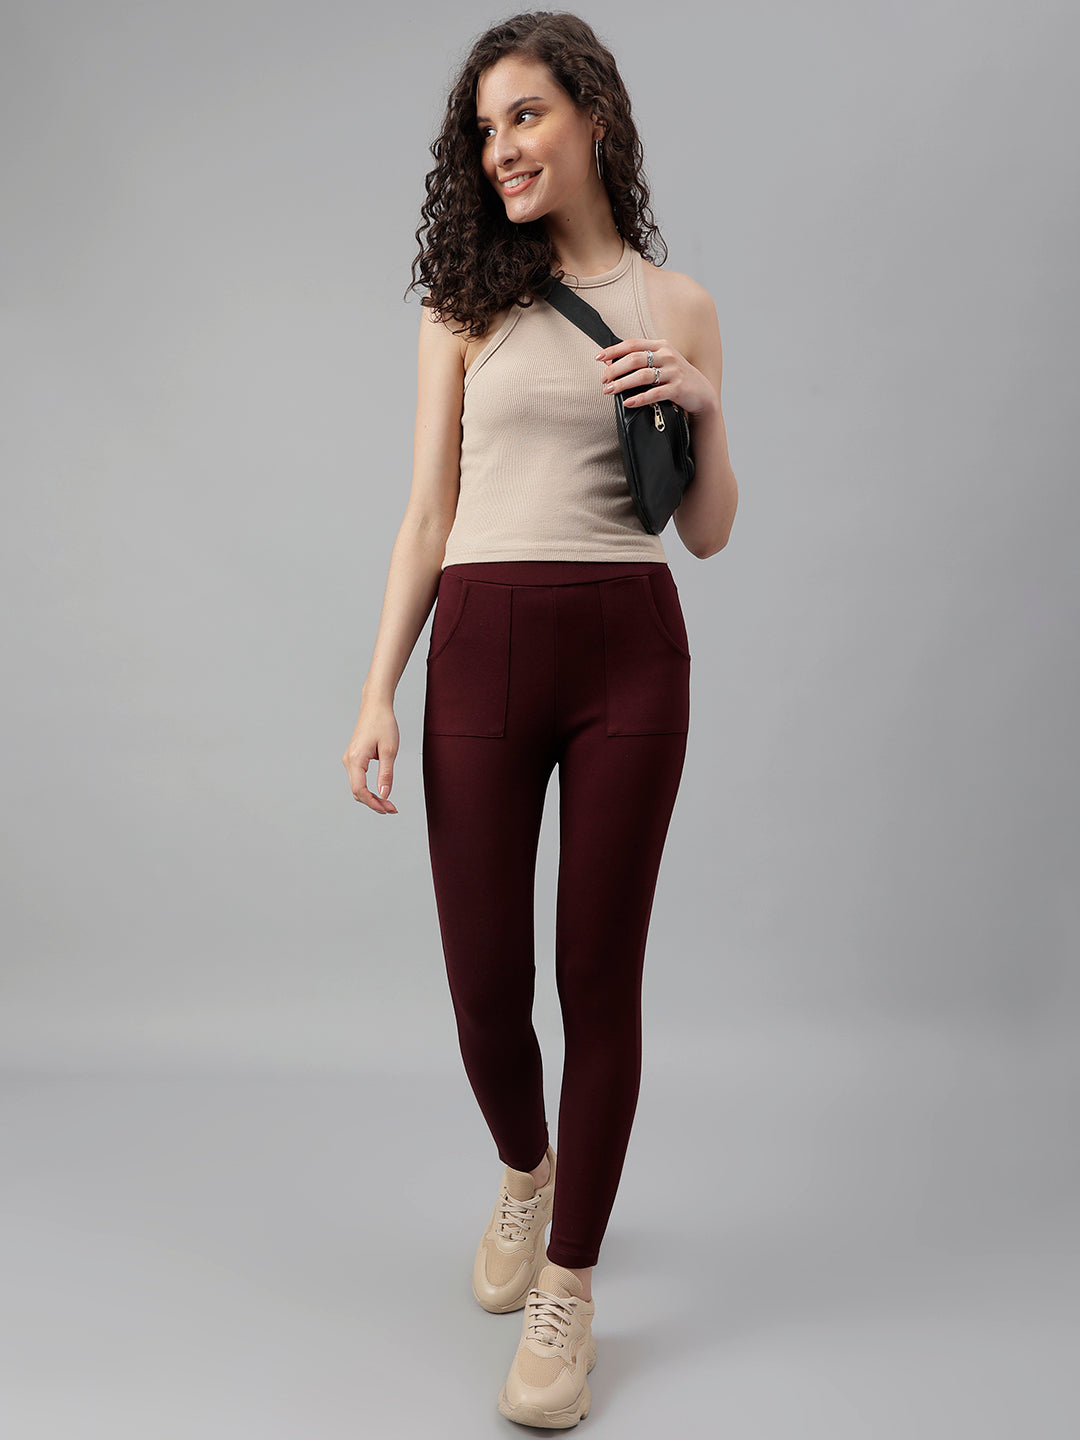 Wine Solid Jeggings Pant